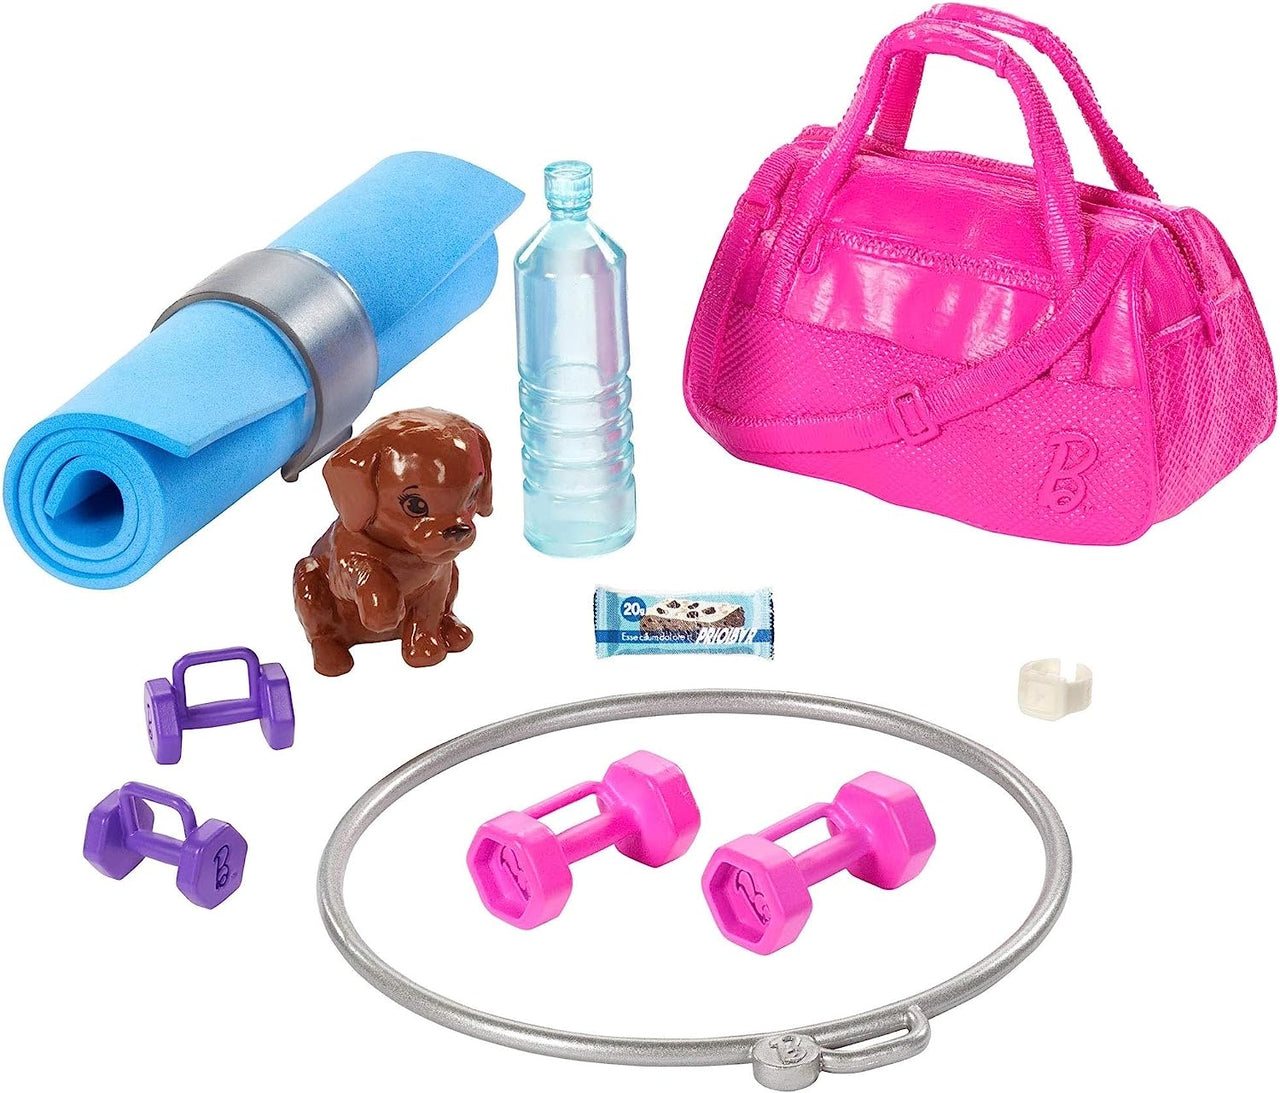 Barbie Fitness Doll With Puppy And 9 Accessories